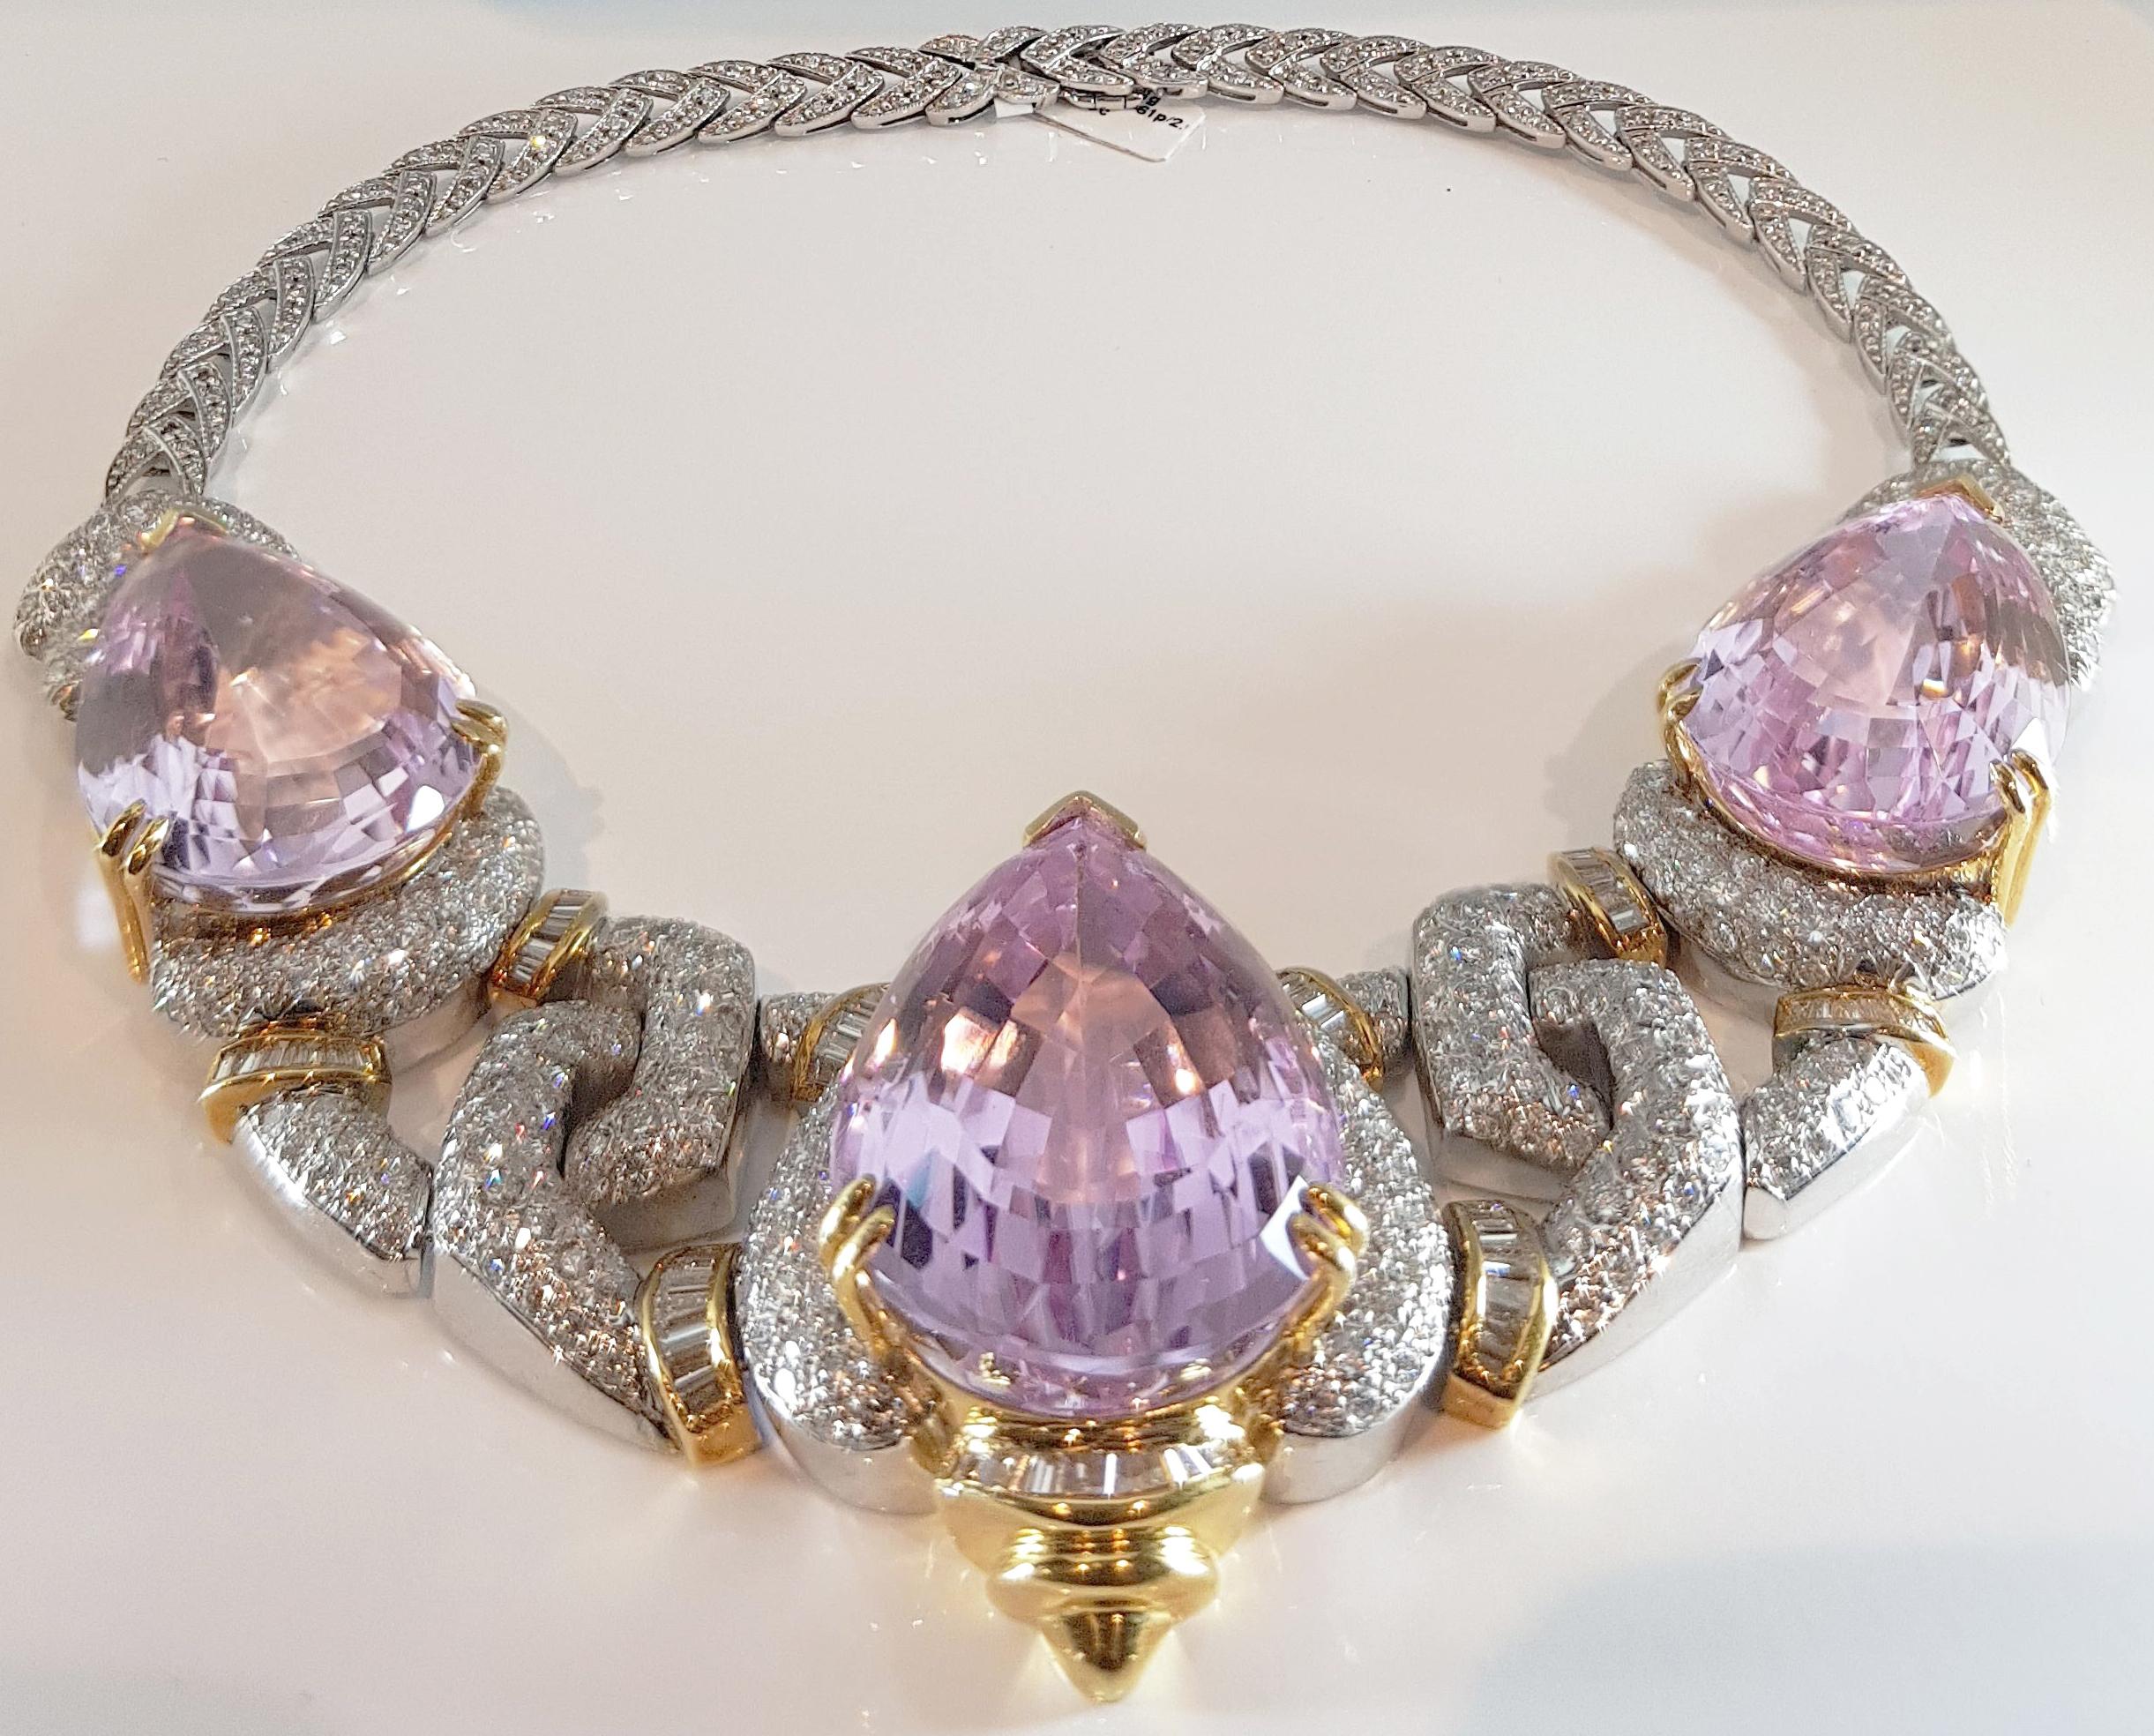 Stunning Kunzite Necklace composed of 3 pear shape Beautiful lilac-pink 20ct kunzites.

Kunzite is the best-known variety of the mineral spodumene. 
It’s named after famed gemologist George Frederick Kunz, 
who was the first to identify it as a